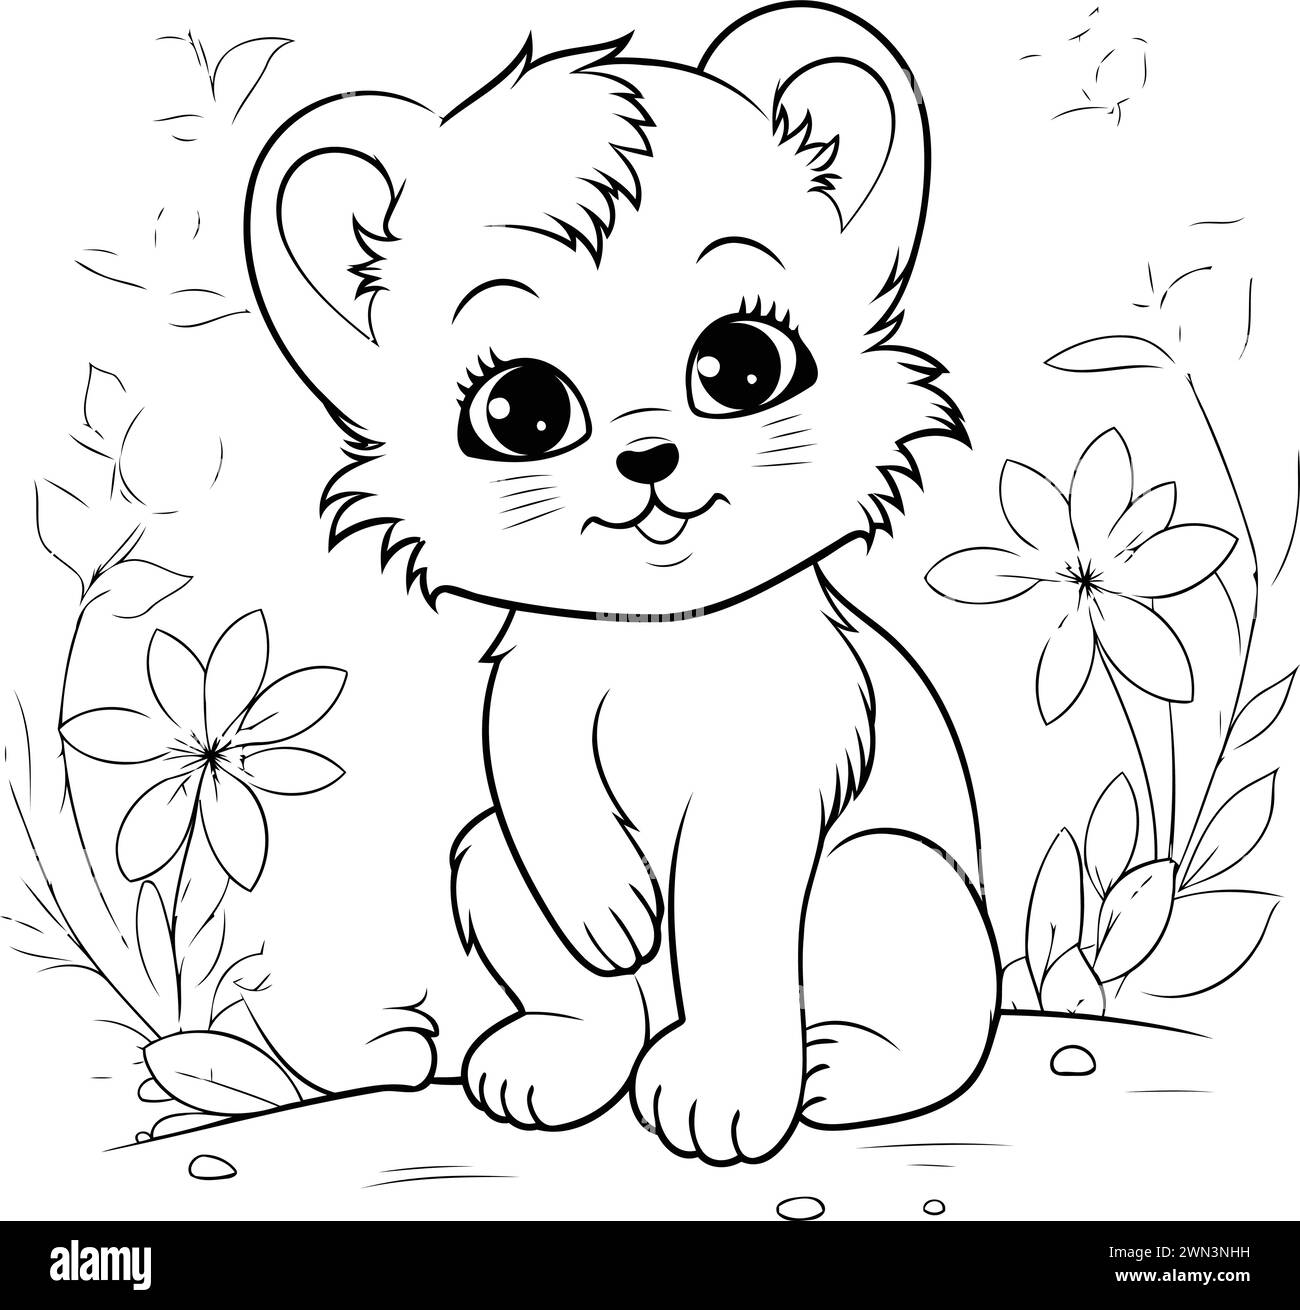 Coloring pages for children. Cute cartoon bear sits on the ground among flowers. Stock Vector